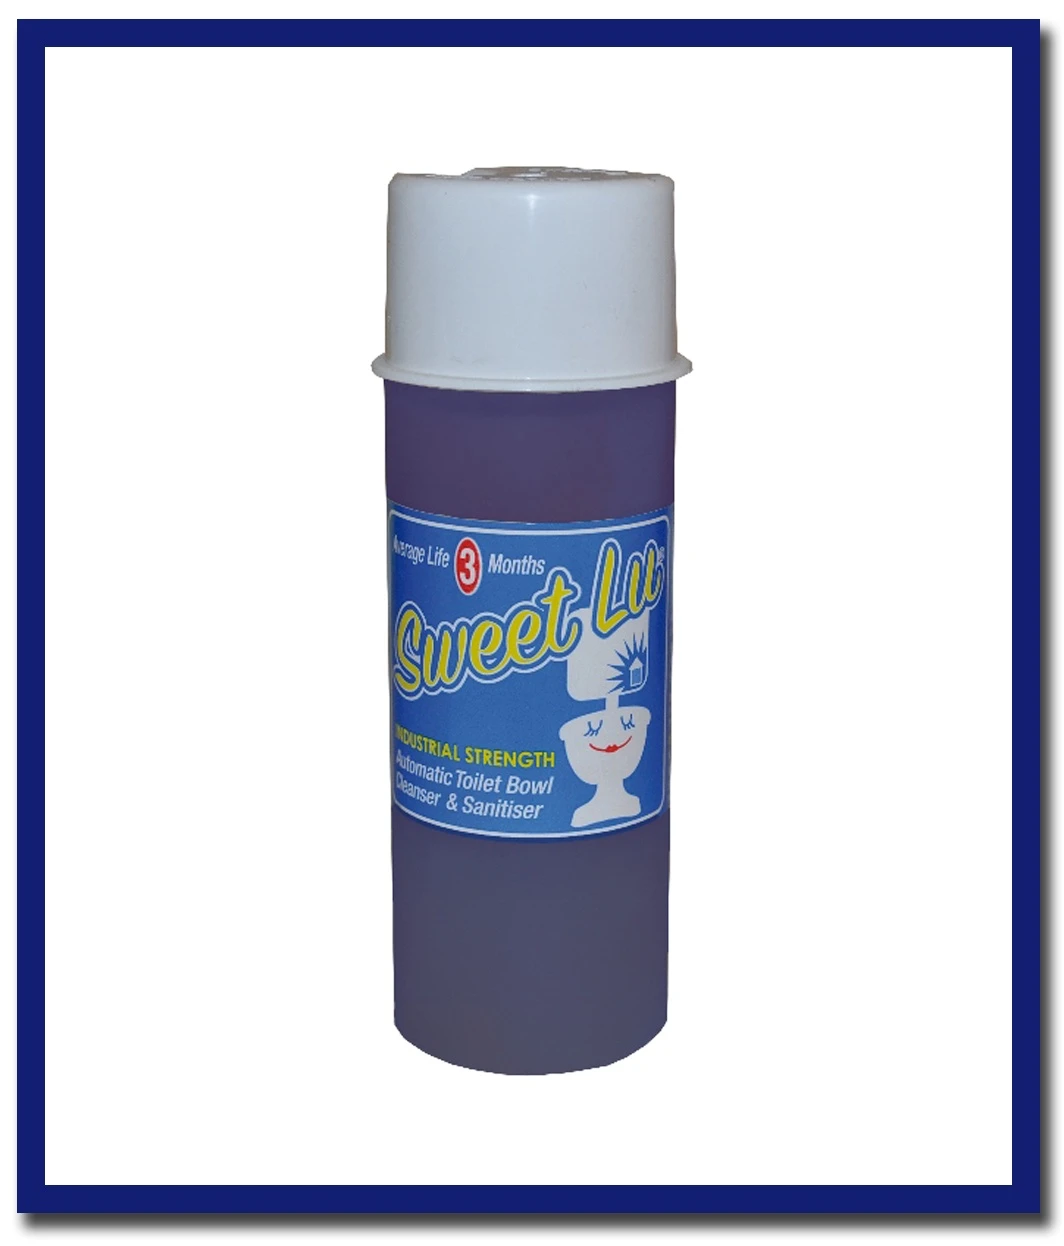 Edco Sweet Lu - 1 Unit - Stone Doctor Australia - Cleaning Products > Chemicals > Toilet Deodoriser